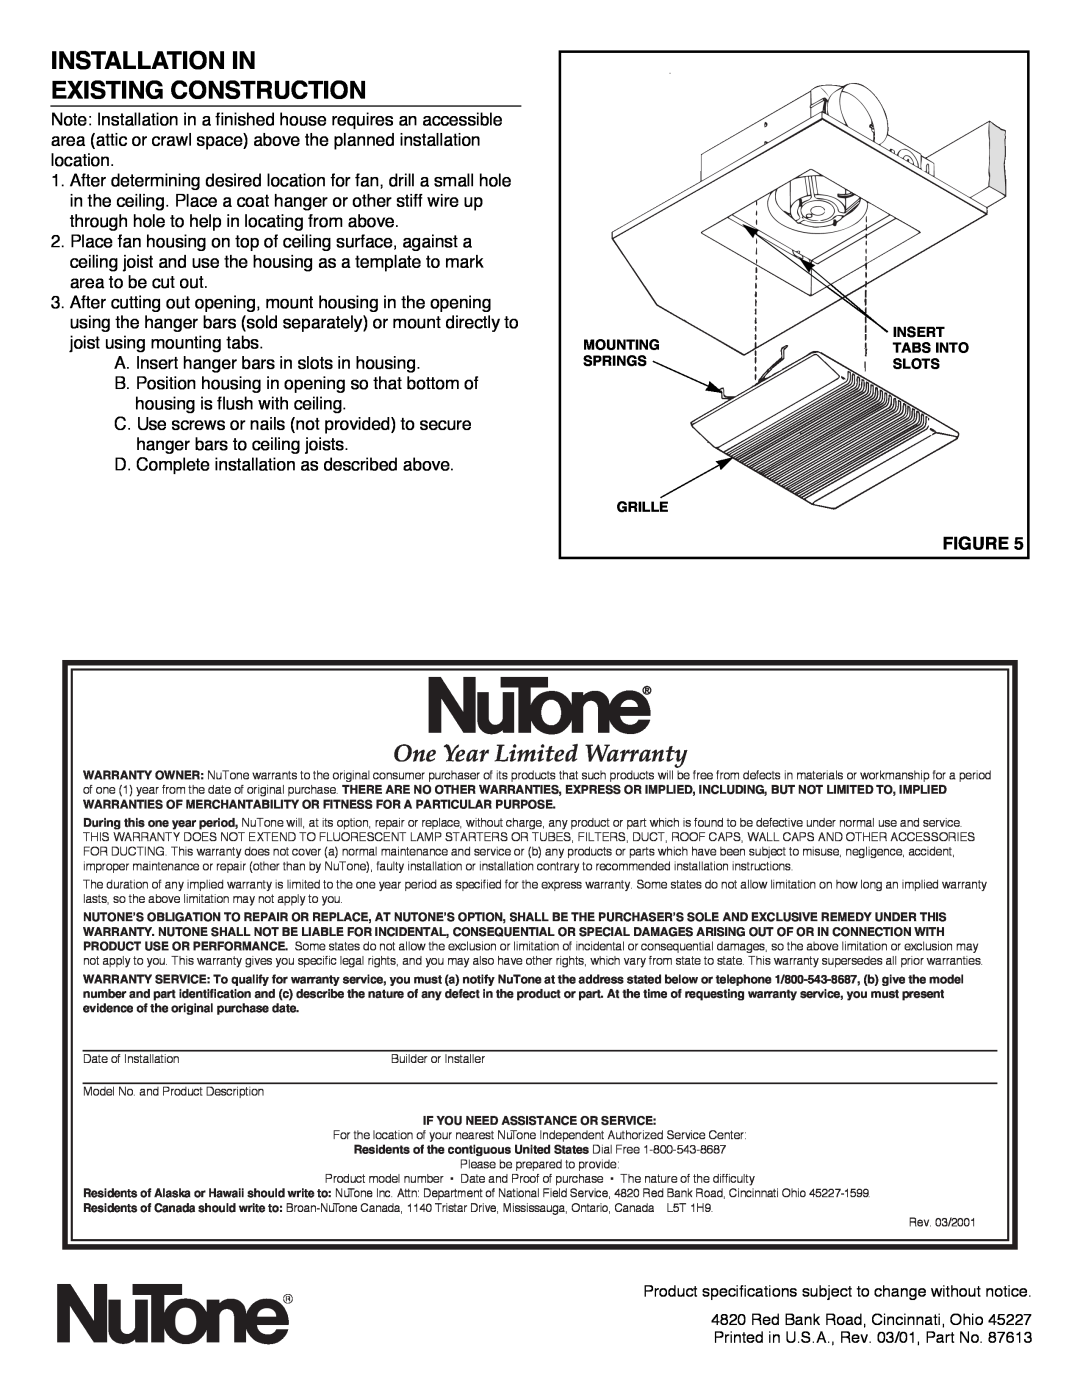 NuTone 8814R installation instructions Installation In Existing Construction, One Year Limited Warranty 